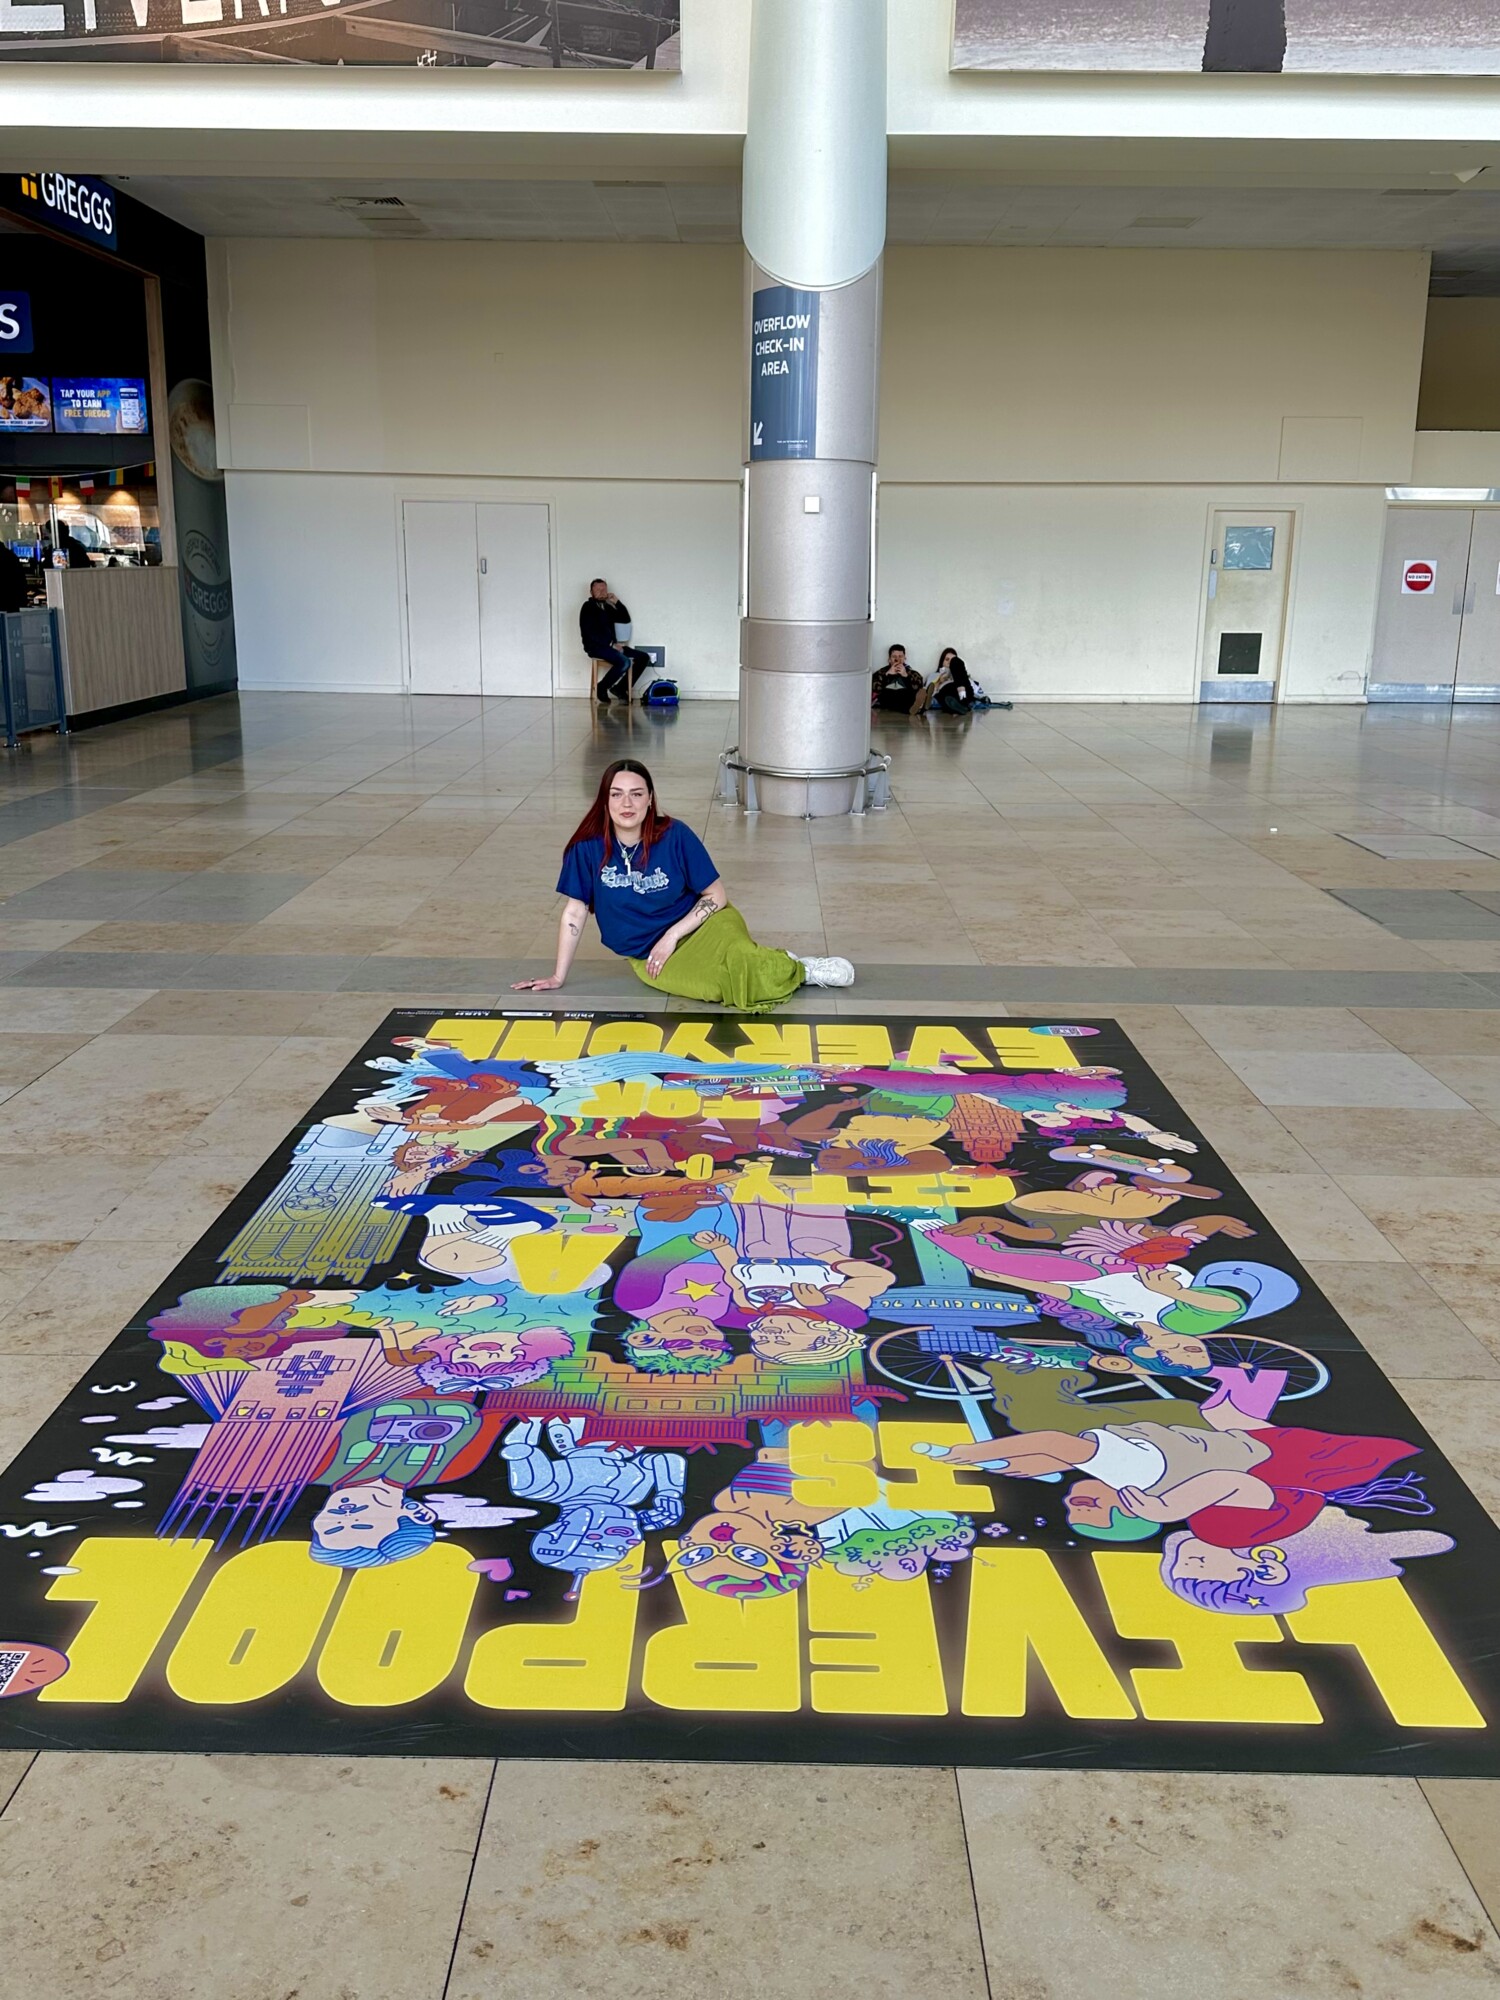 Liverpool airport X Homotopia mural for Eurovision